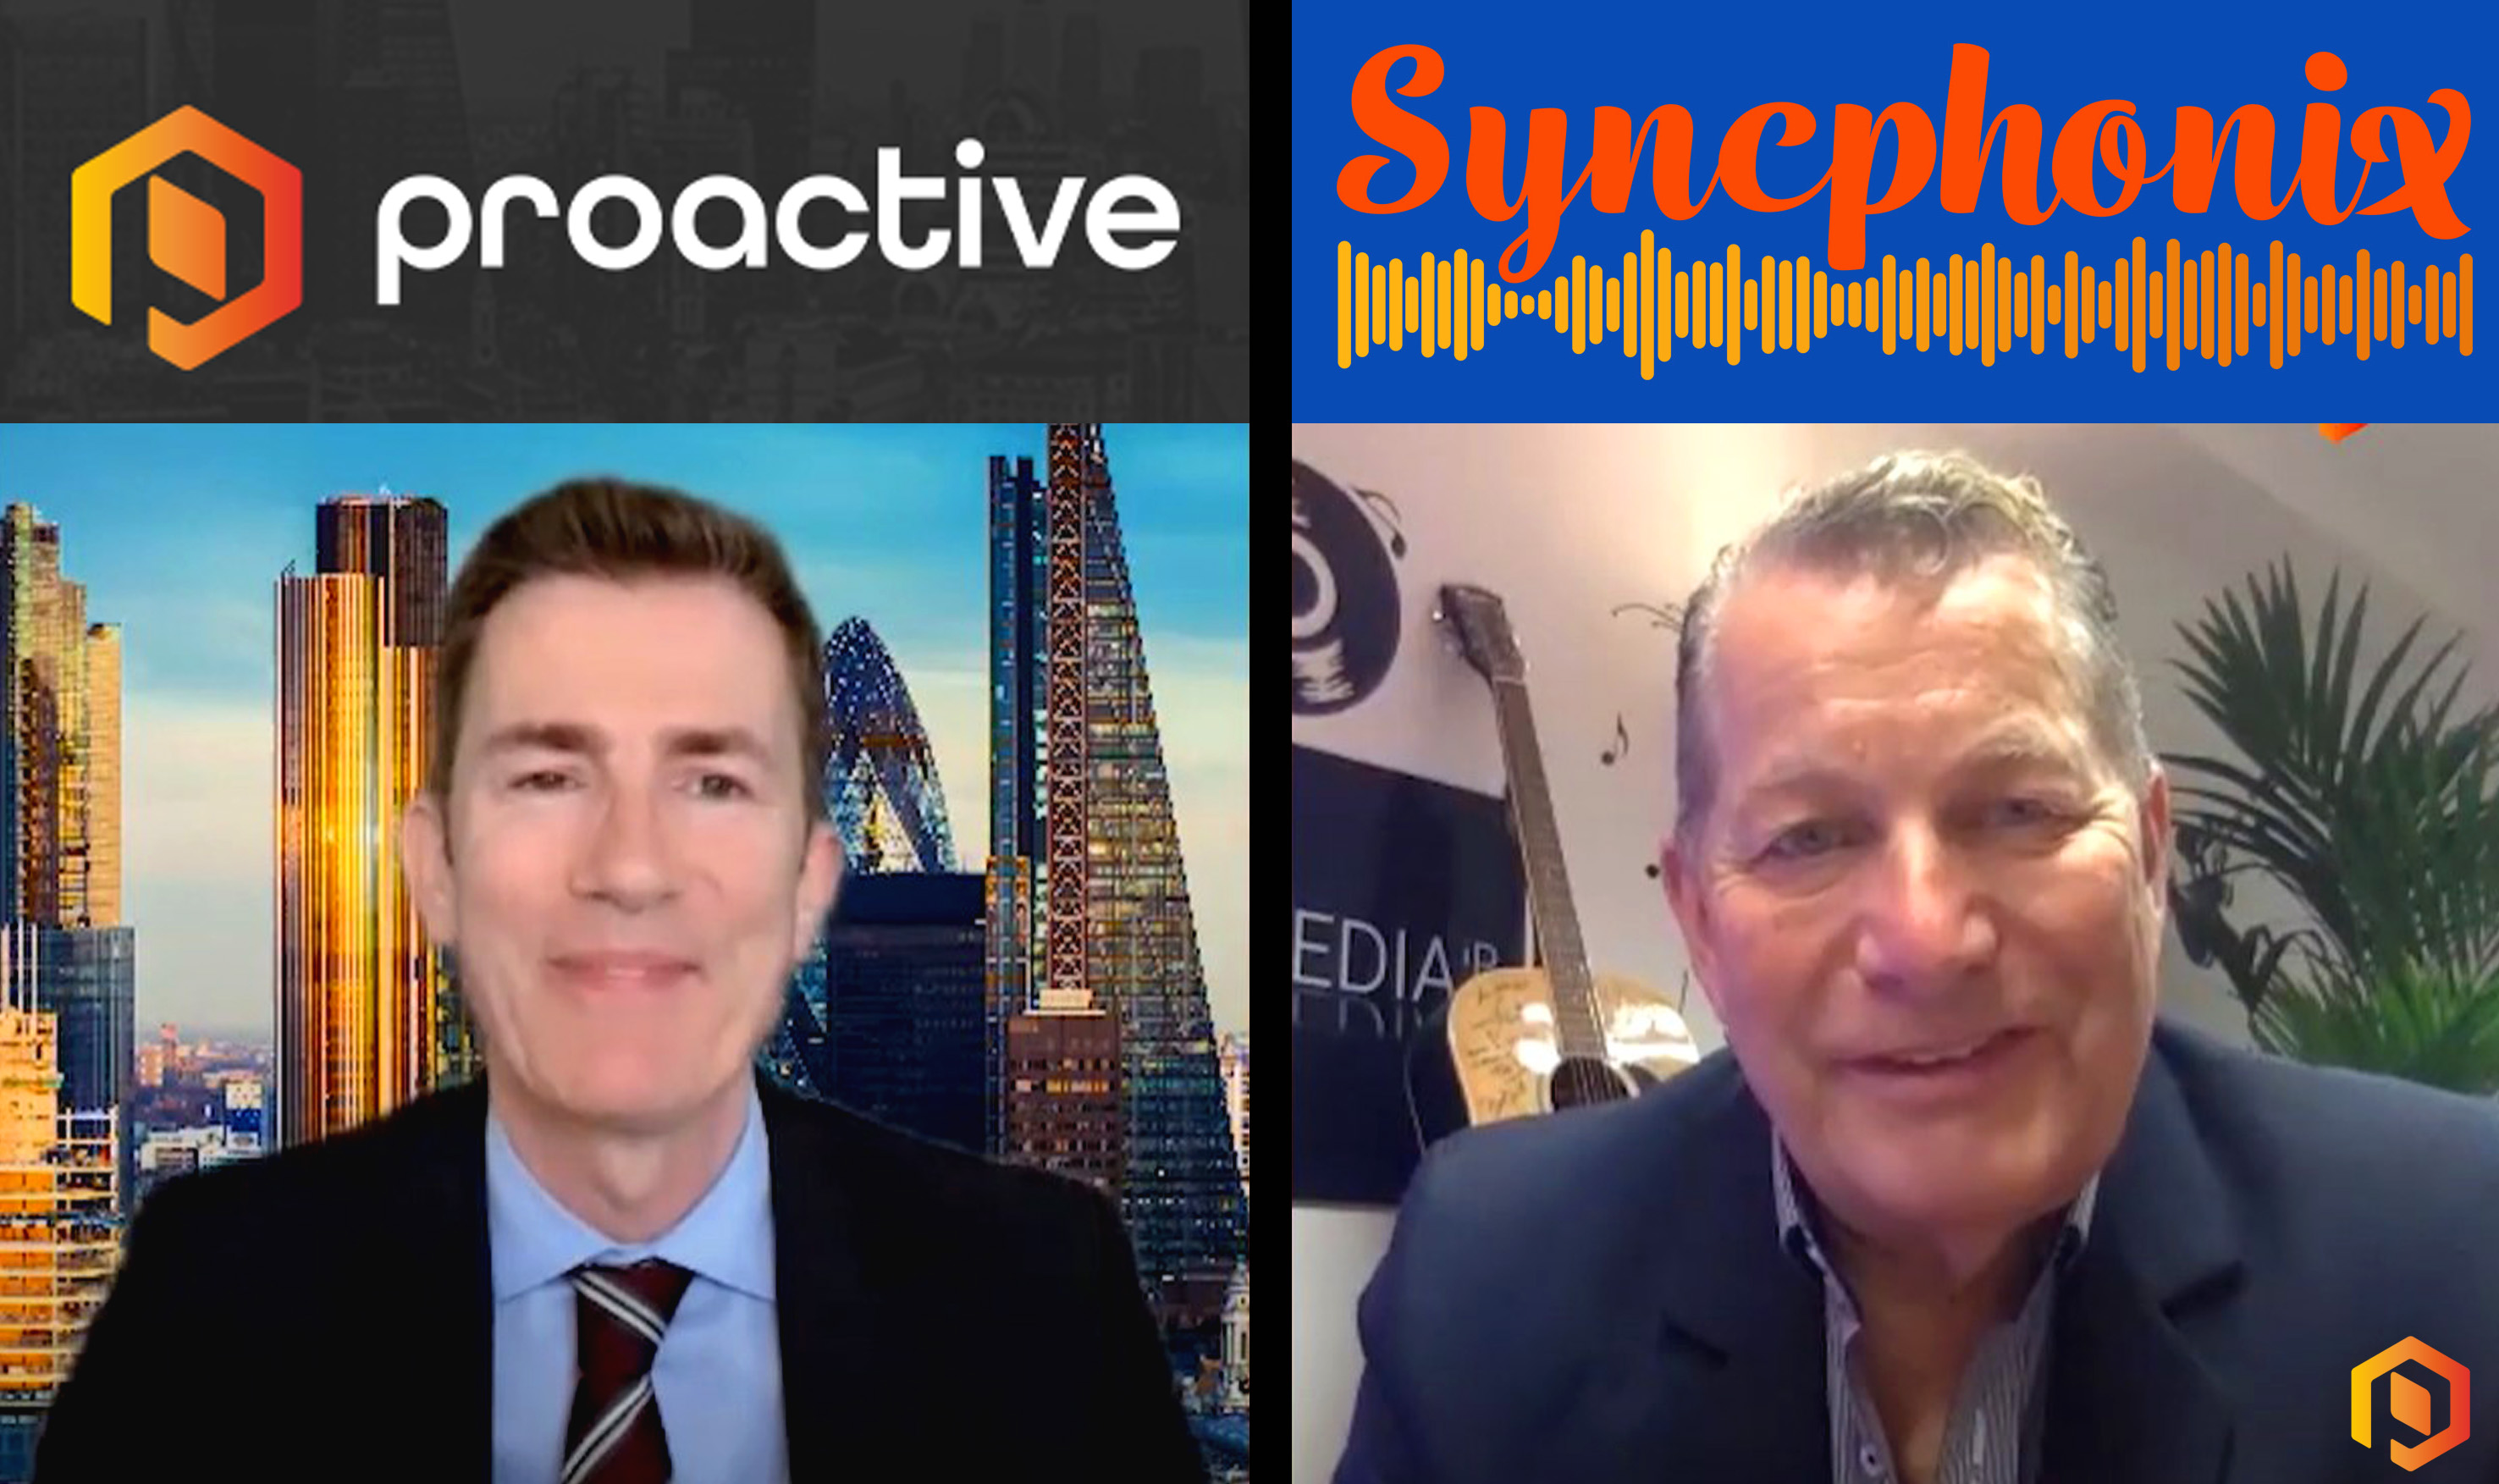 All About Syncphonix: CEO Michael Infante interviewed by Proactive London about One Media iP’s new sync initiative